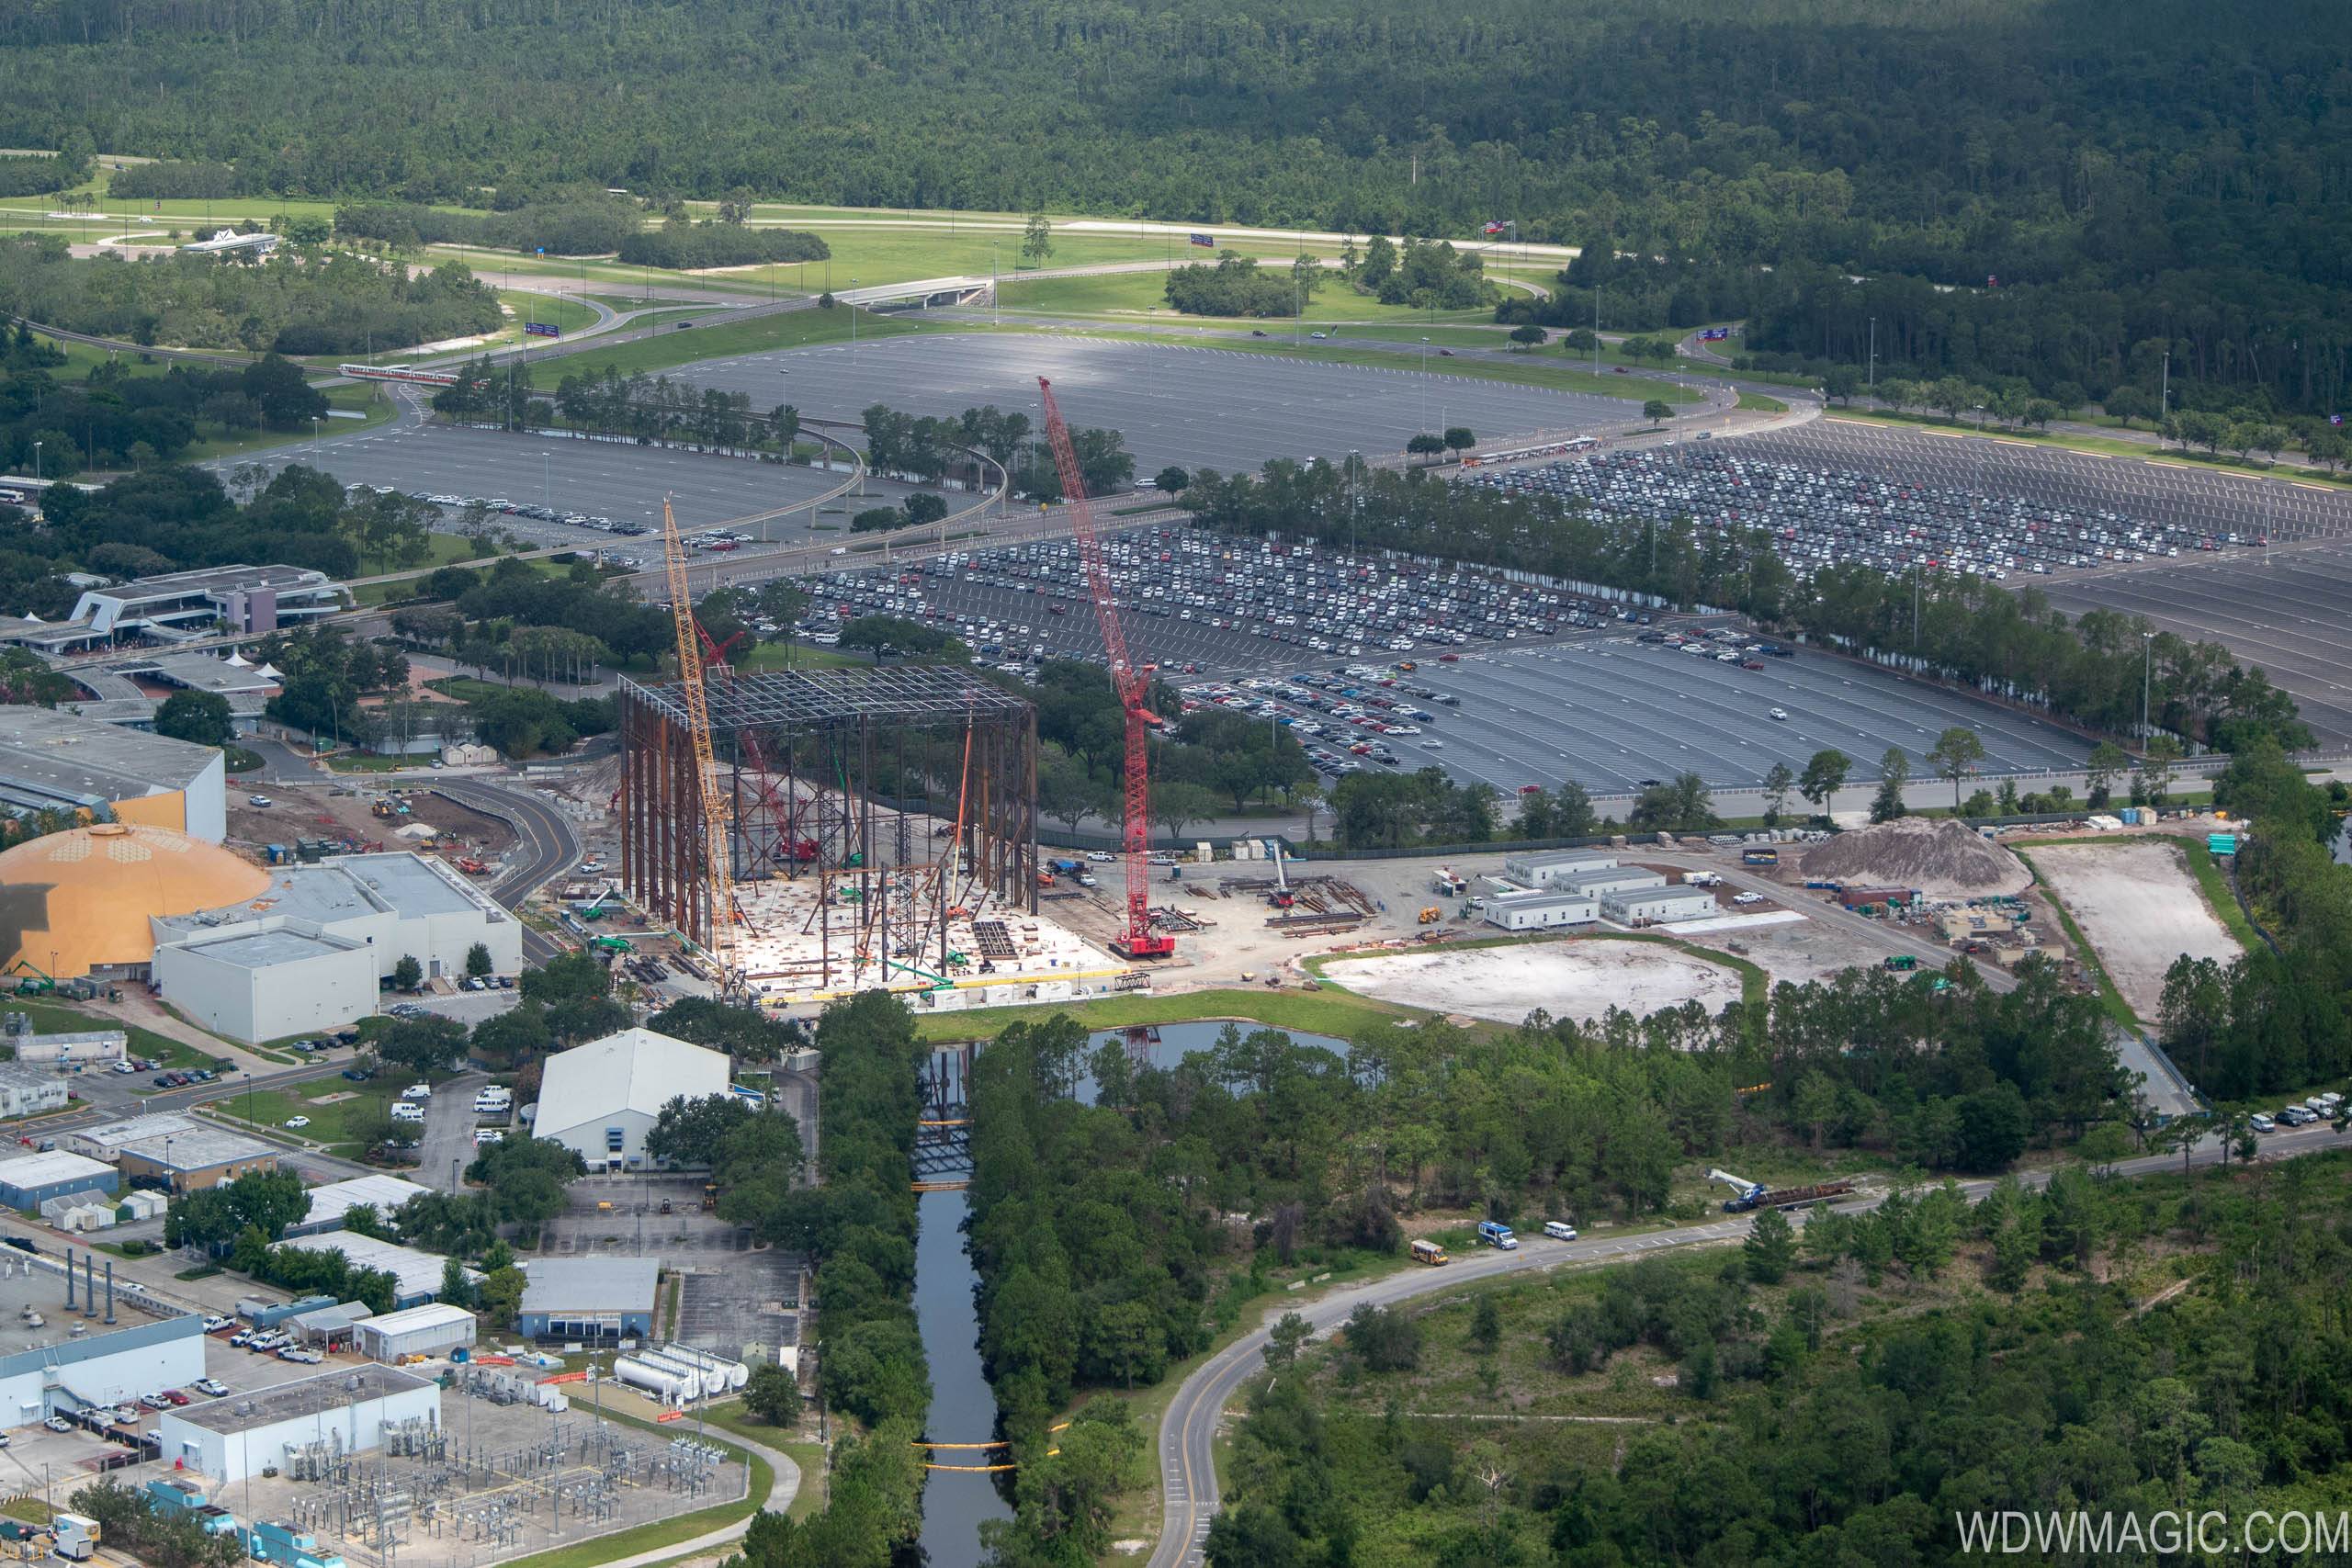 PHOTOS - Birds-eye view of Guardians of the Galaxy coaster under construction at Epcot